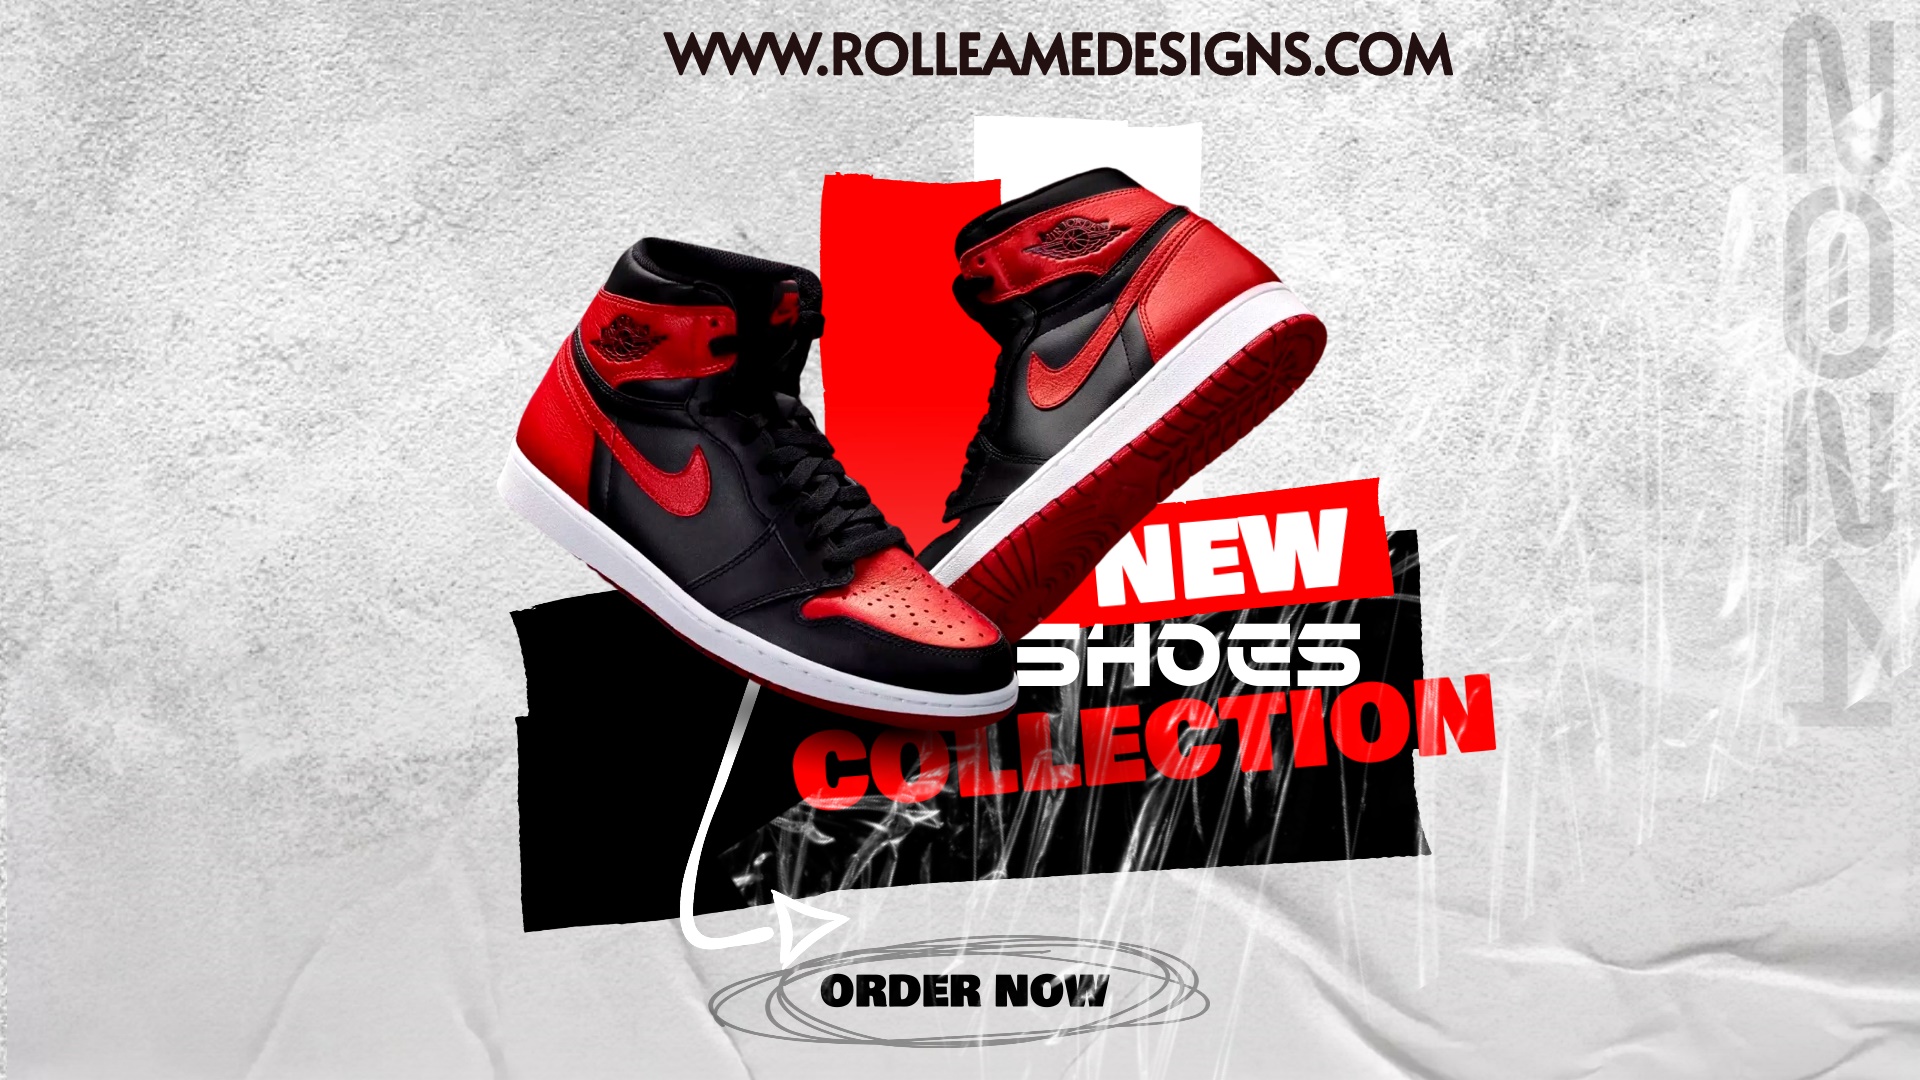 New shoes collection ROLLEAME DESIGNS